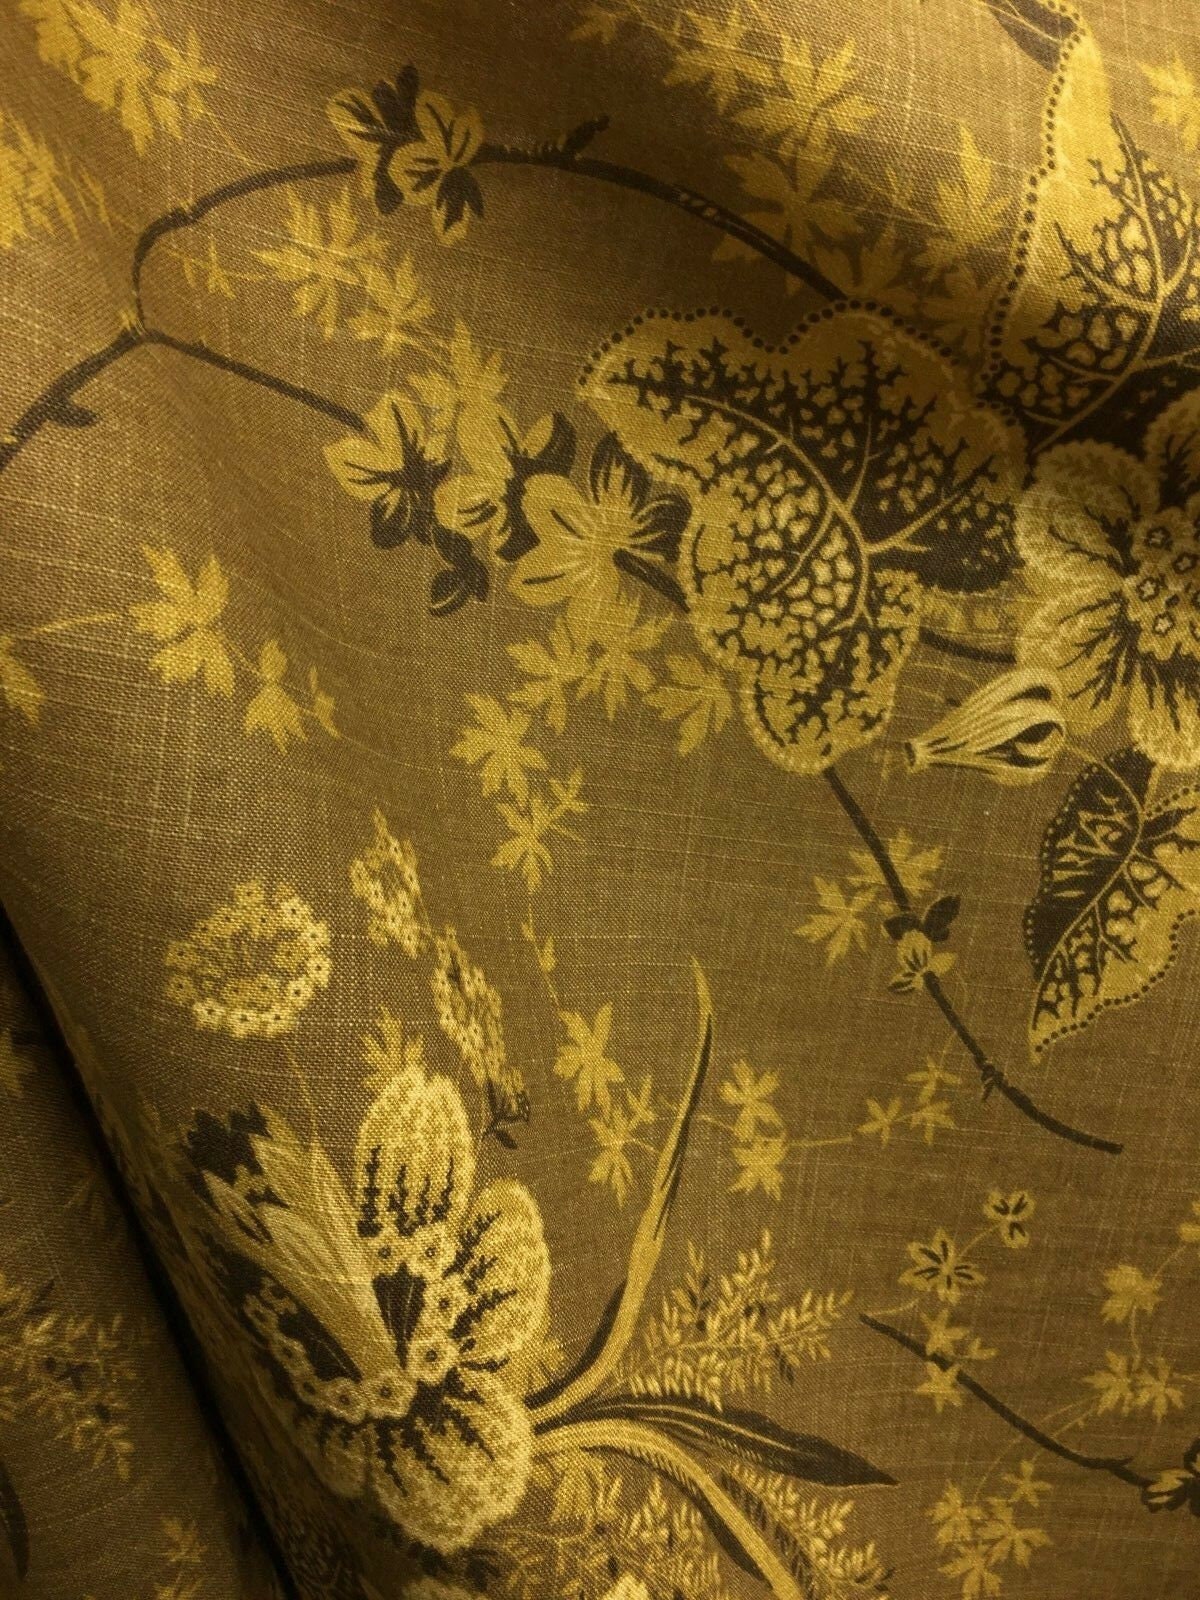 DARK GOLD BROWN Floral Printed Cotton Linen Fabric (54 in.) Sold By The Yard